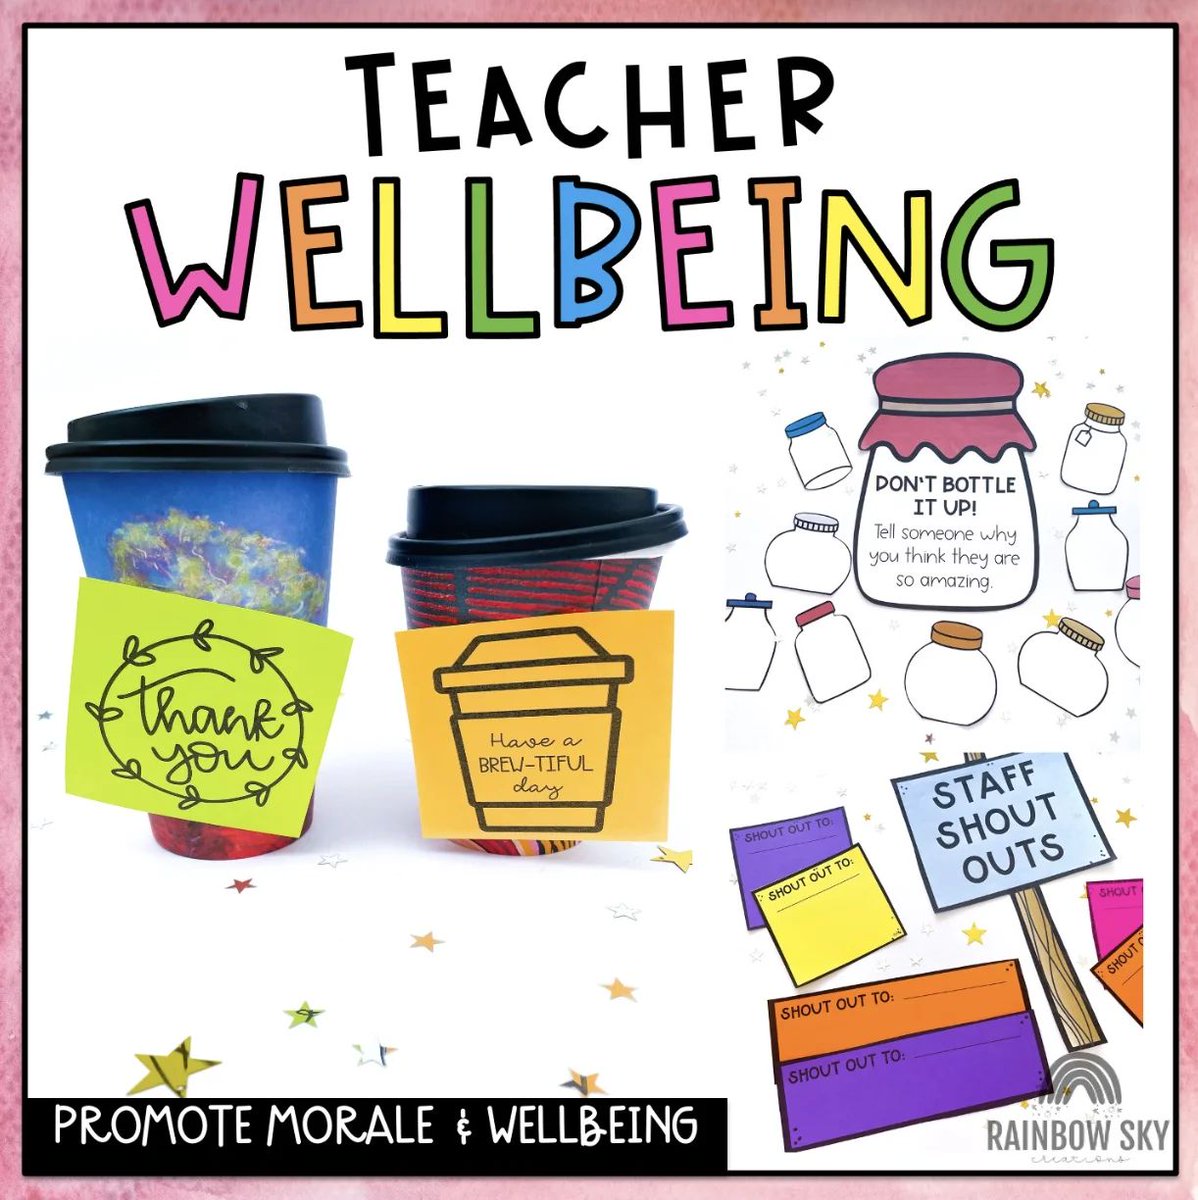 🌈 This #WorkplaceWellbeingDay, let's celebrate our SPHE/RSE teachers who nurture not just academic skills but holistic health too! Take a moment today to reflect on your own wellbeing. Remember, to inspire others, we must also care for ourselves. 💪🍏 #SPHE #RSE🌈 
#OideIreland